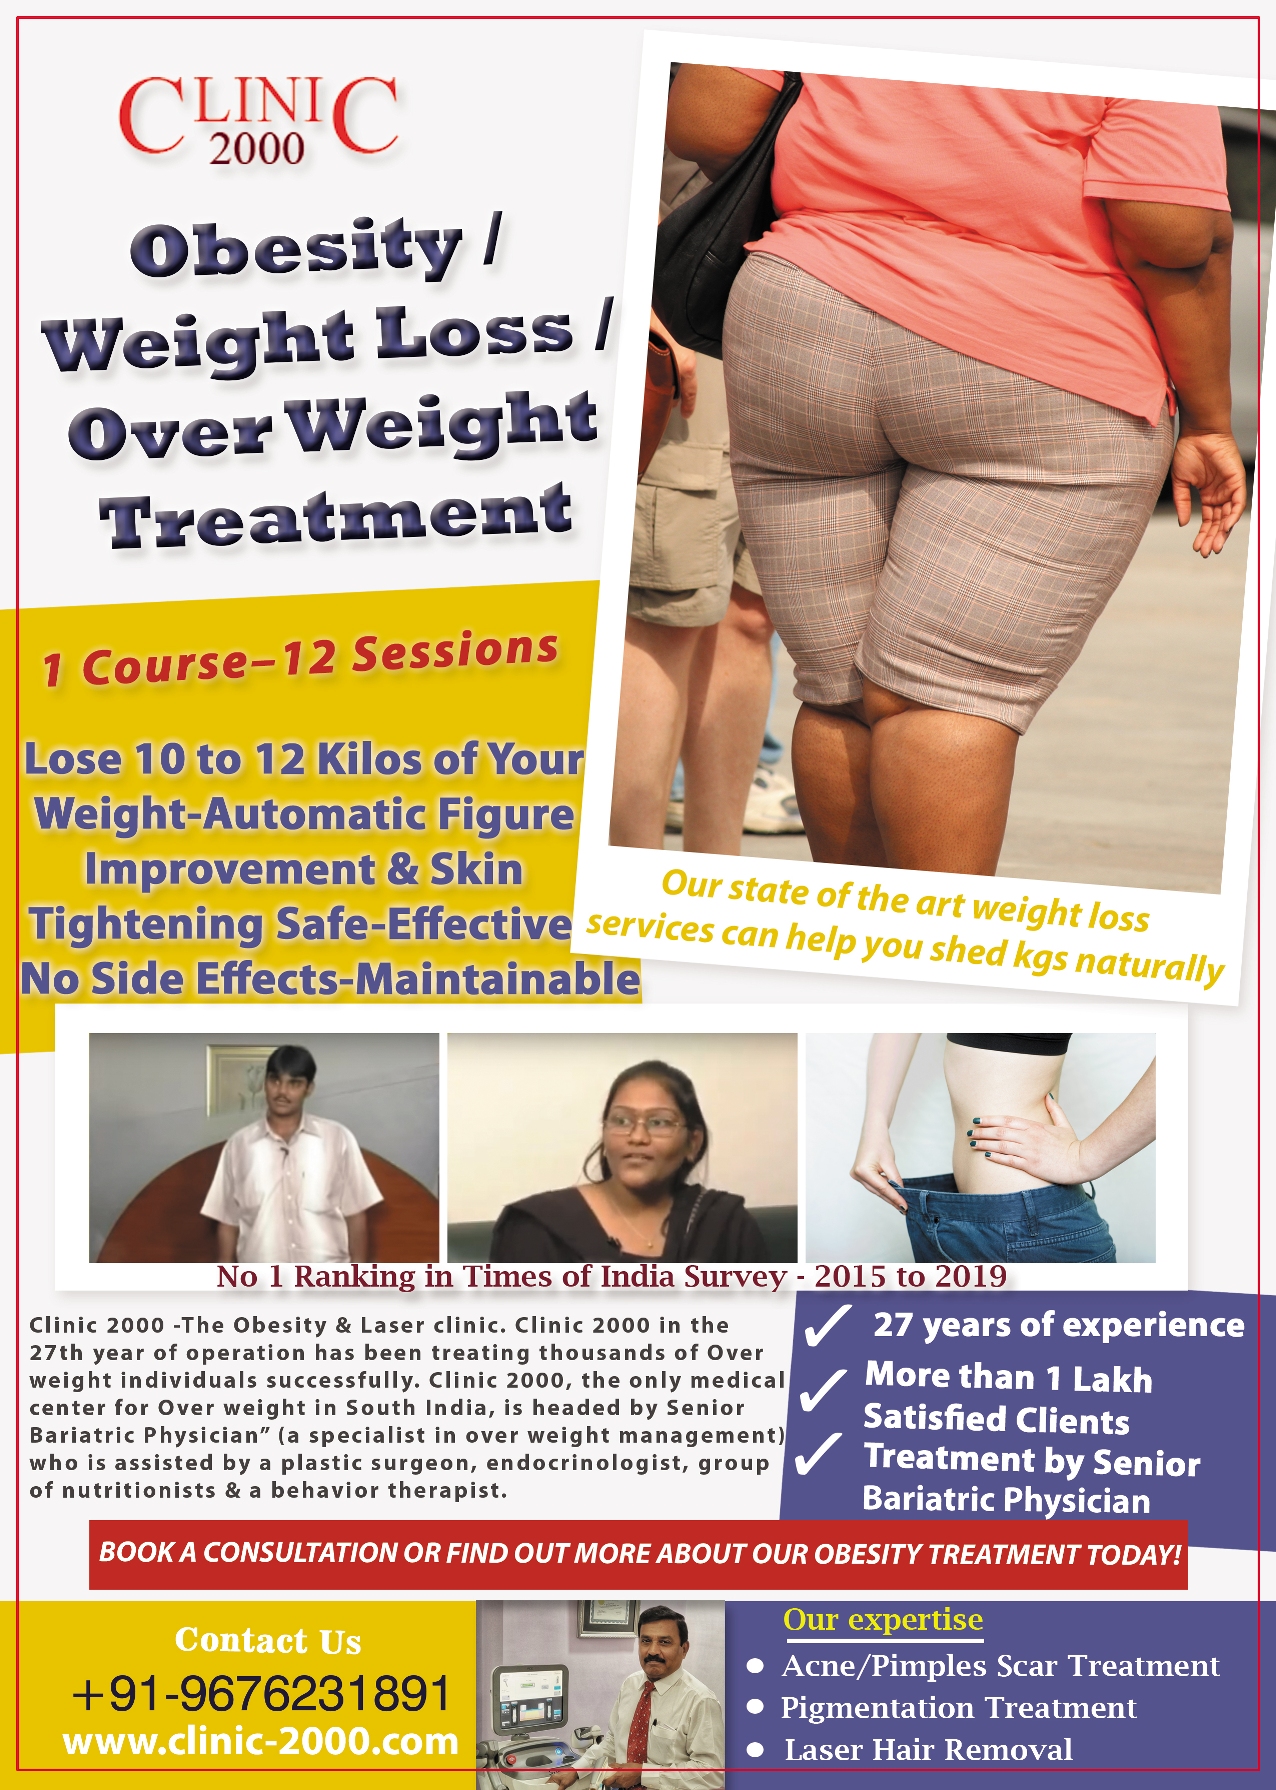 Treatment for Overweight & Obesity-Obesity Weight Loss Treatment